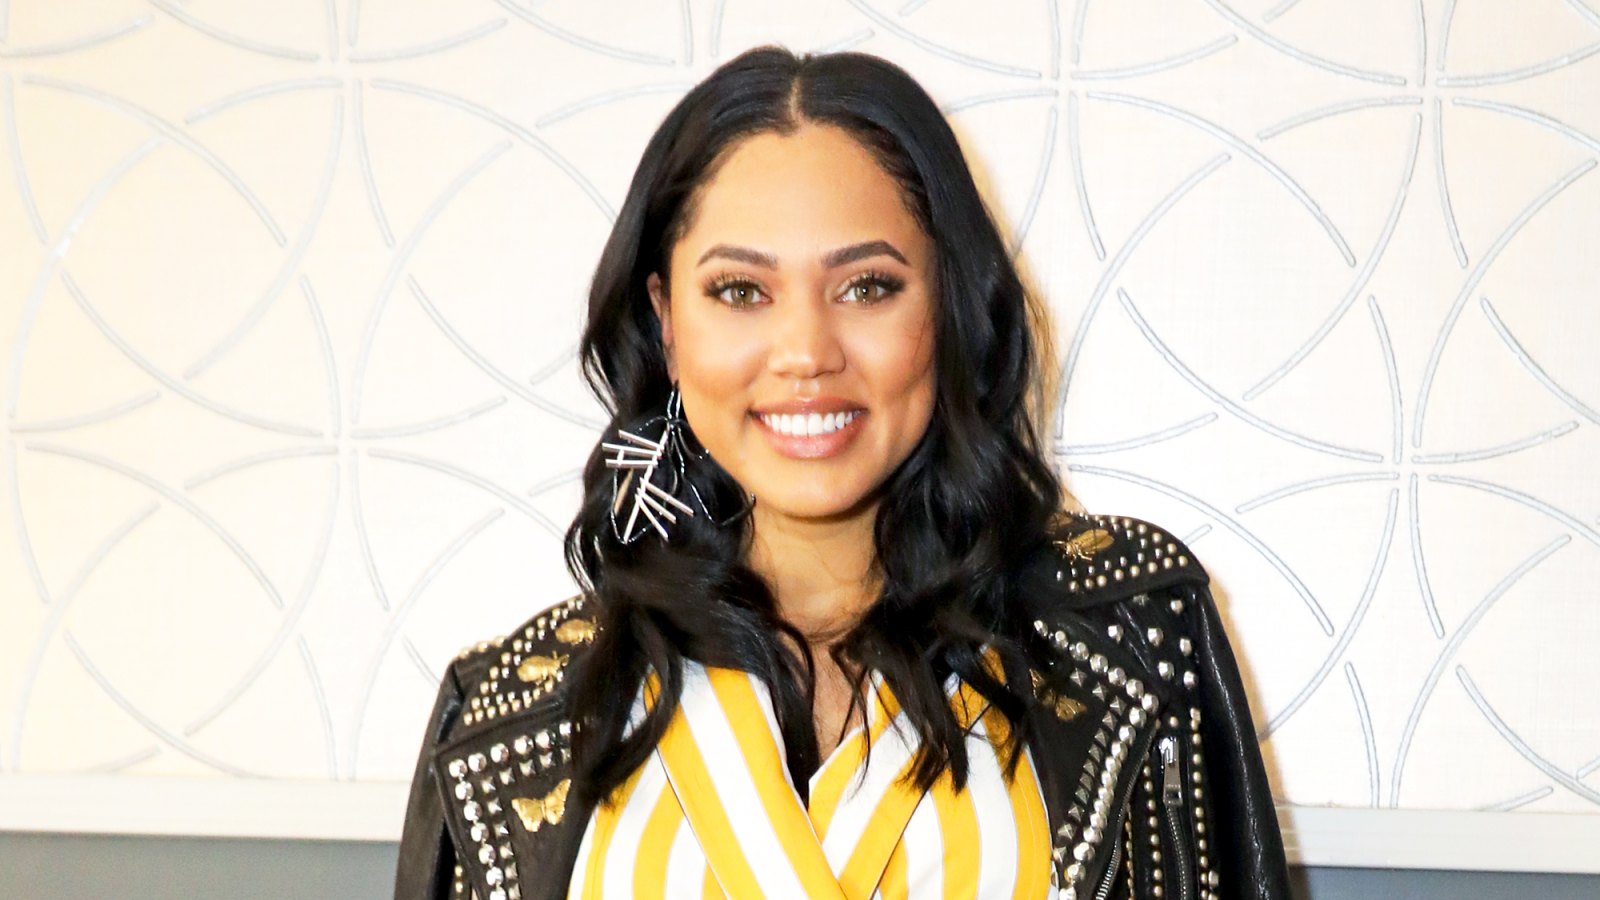 Ayesha Curry attends the Women's Empowerment 2018 Summit Luncheon in Los Angeles, California.